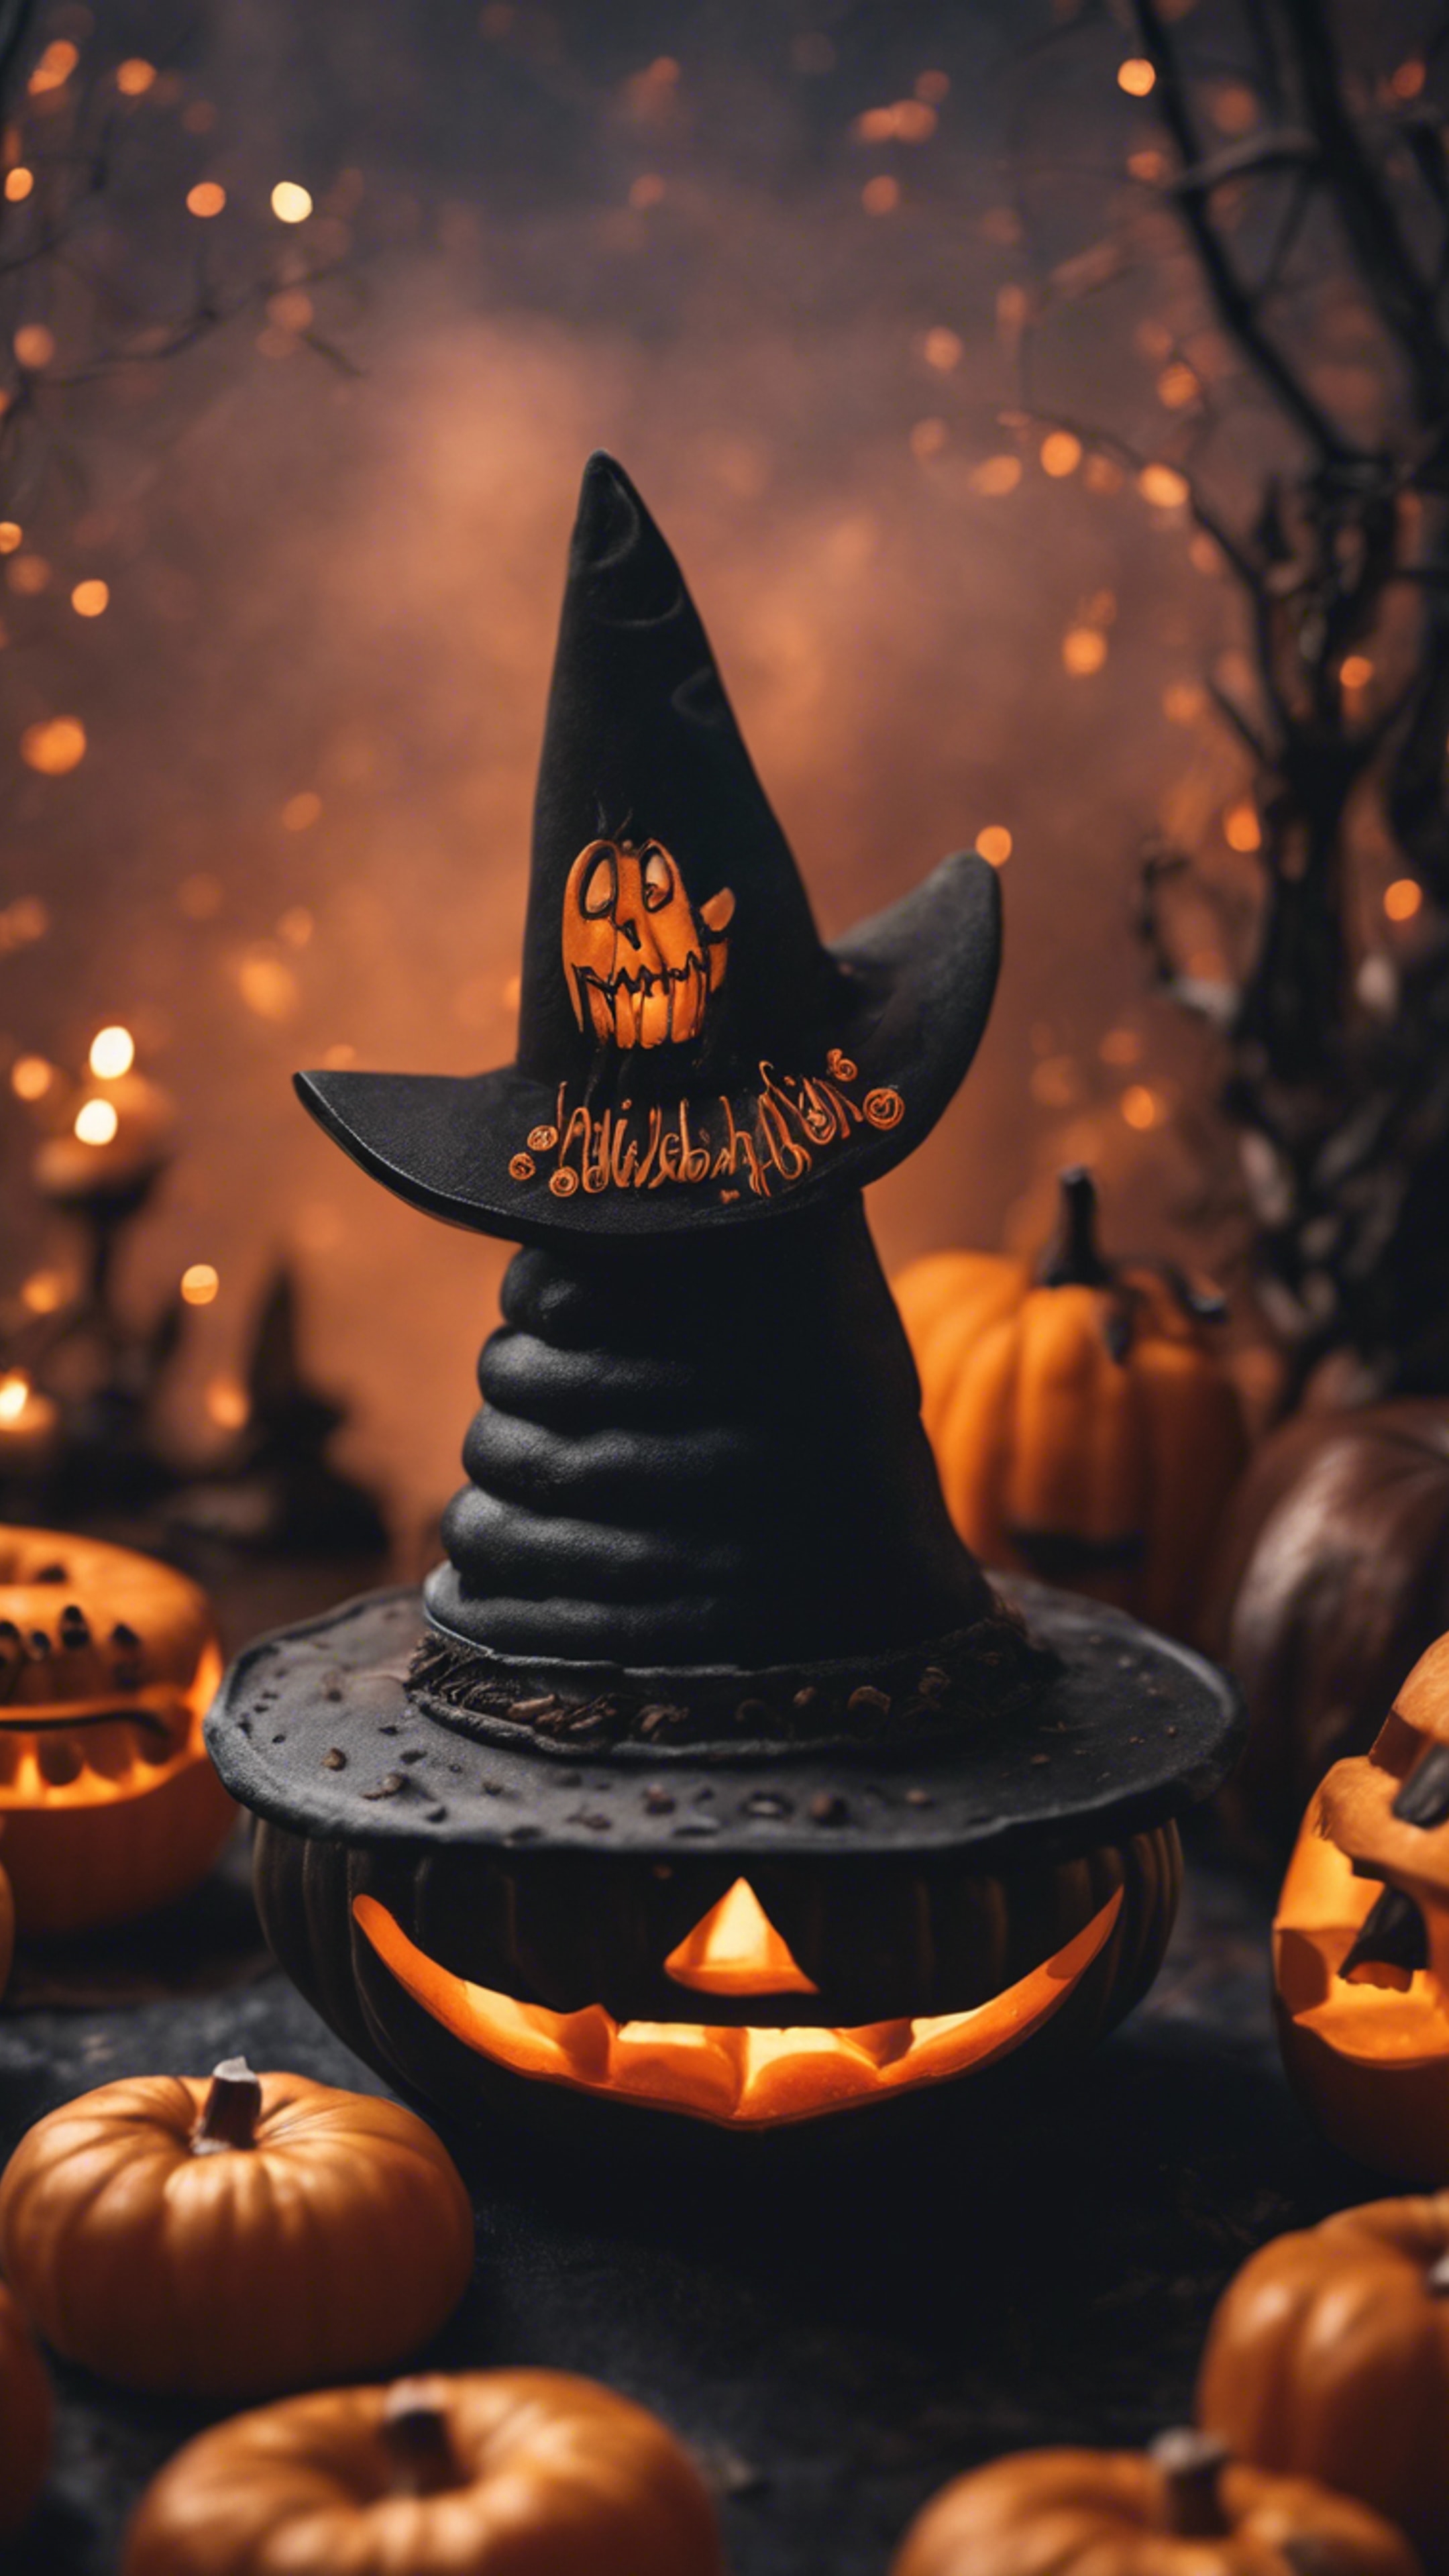 A spooky scene with jack-o-lanterns and a black witch's hat on a pumpkin-spiced donut. Обои[393956df6a264774b0c0]